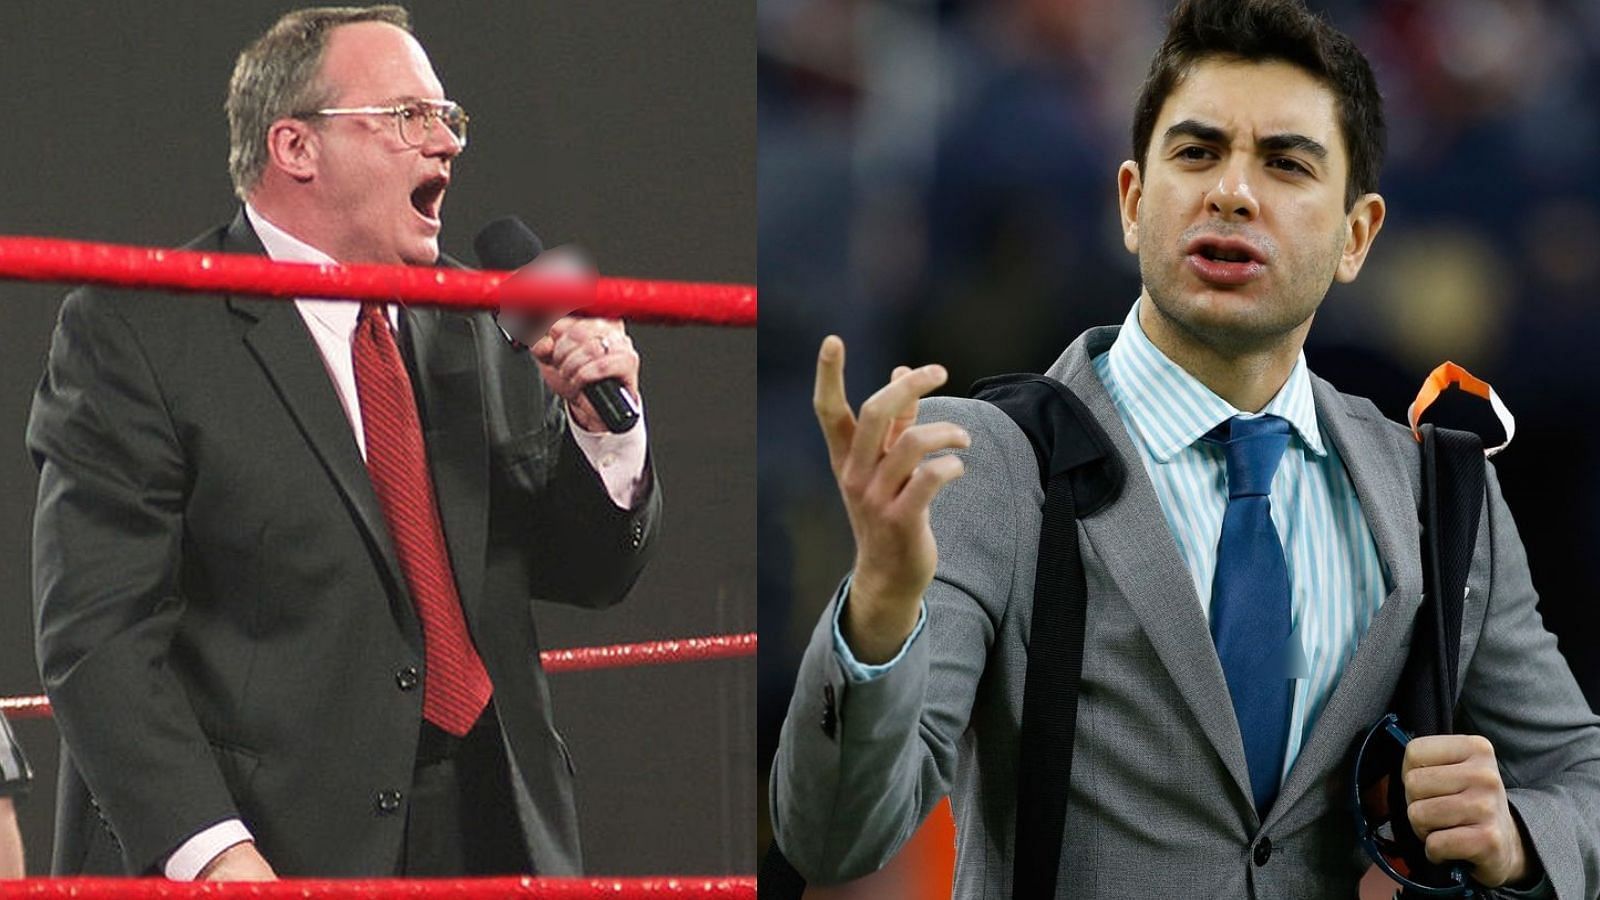 Jim Cornette has slammed AEW and Tony Khan on the booking decisions surrounding a new star